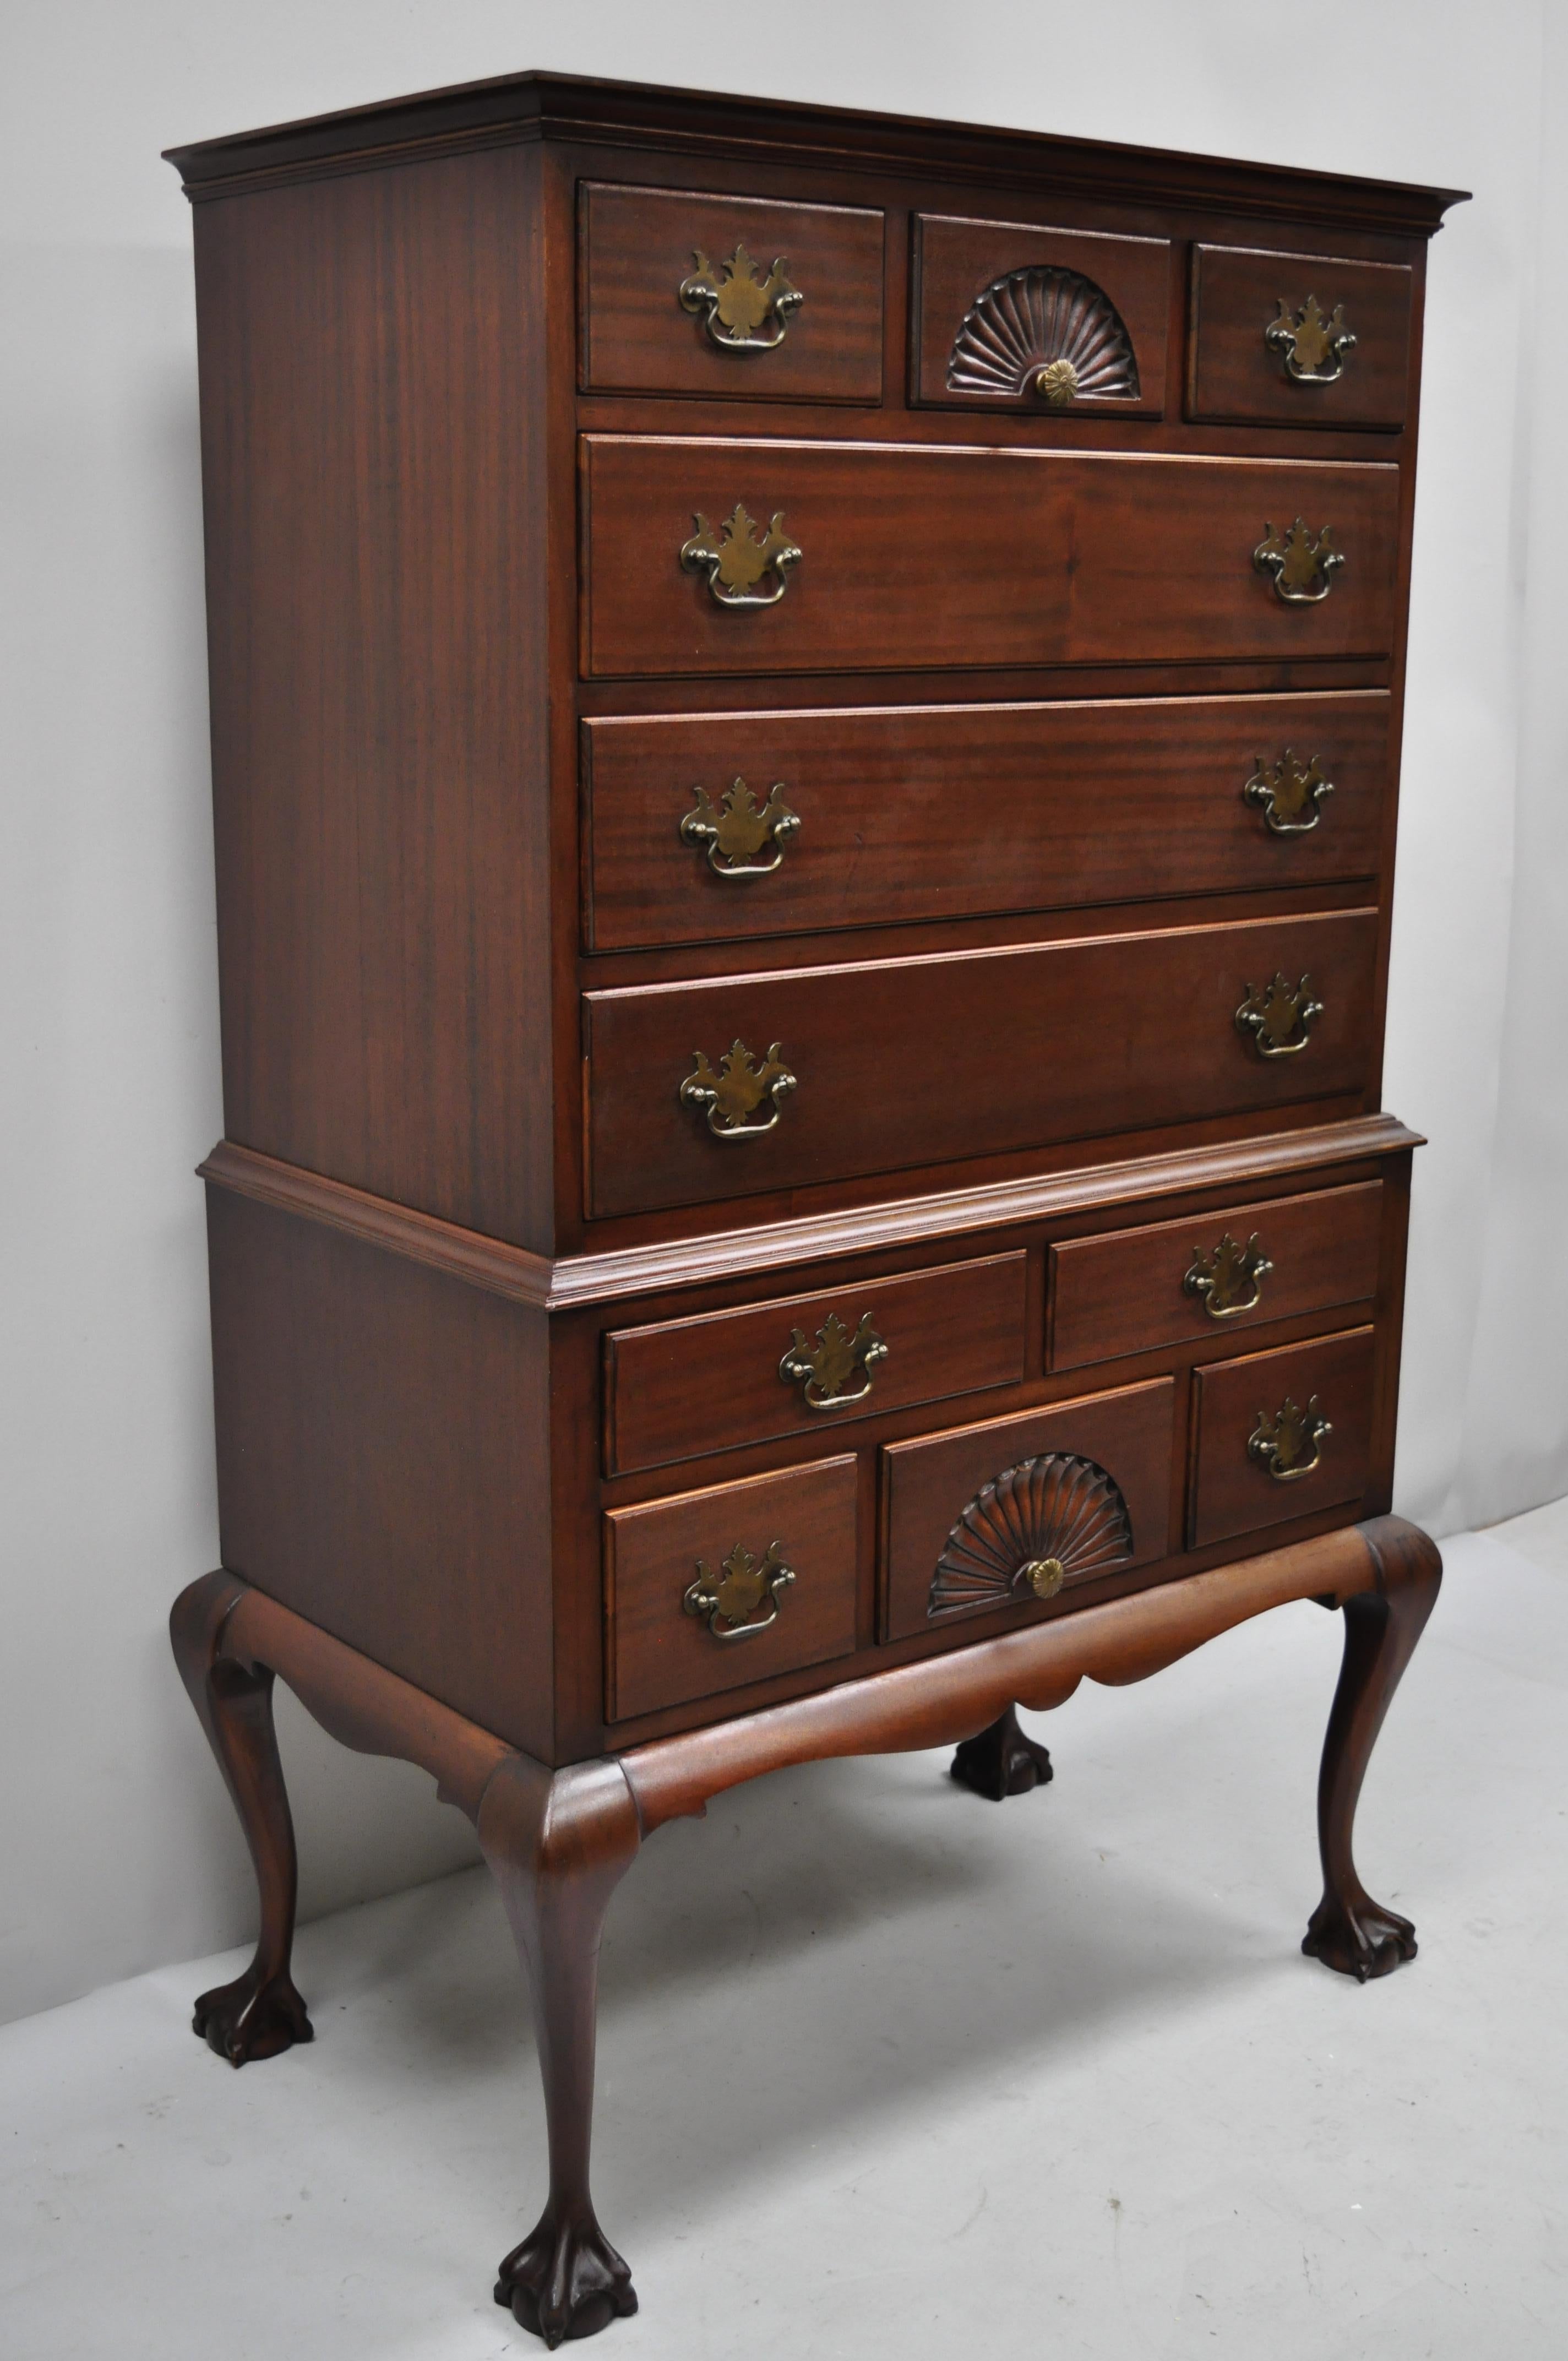 W.A. Hathaway Mahogany Ball & Claw Chippendale Style Highboy Tall Chest Dresser 2